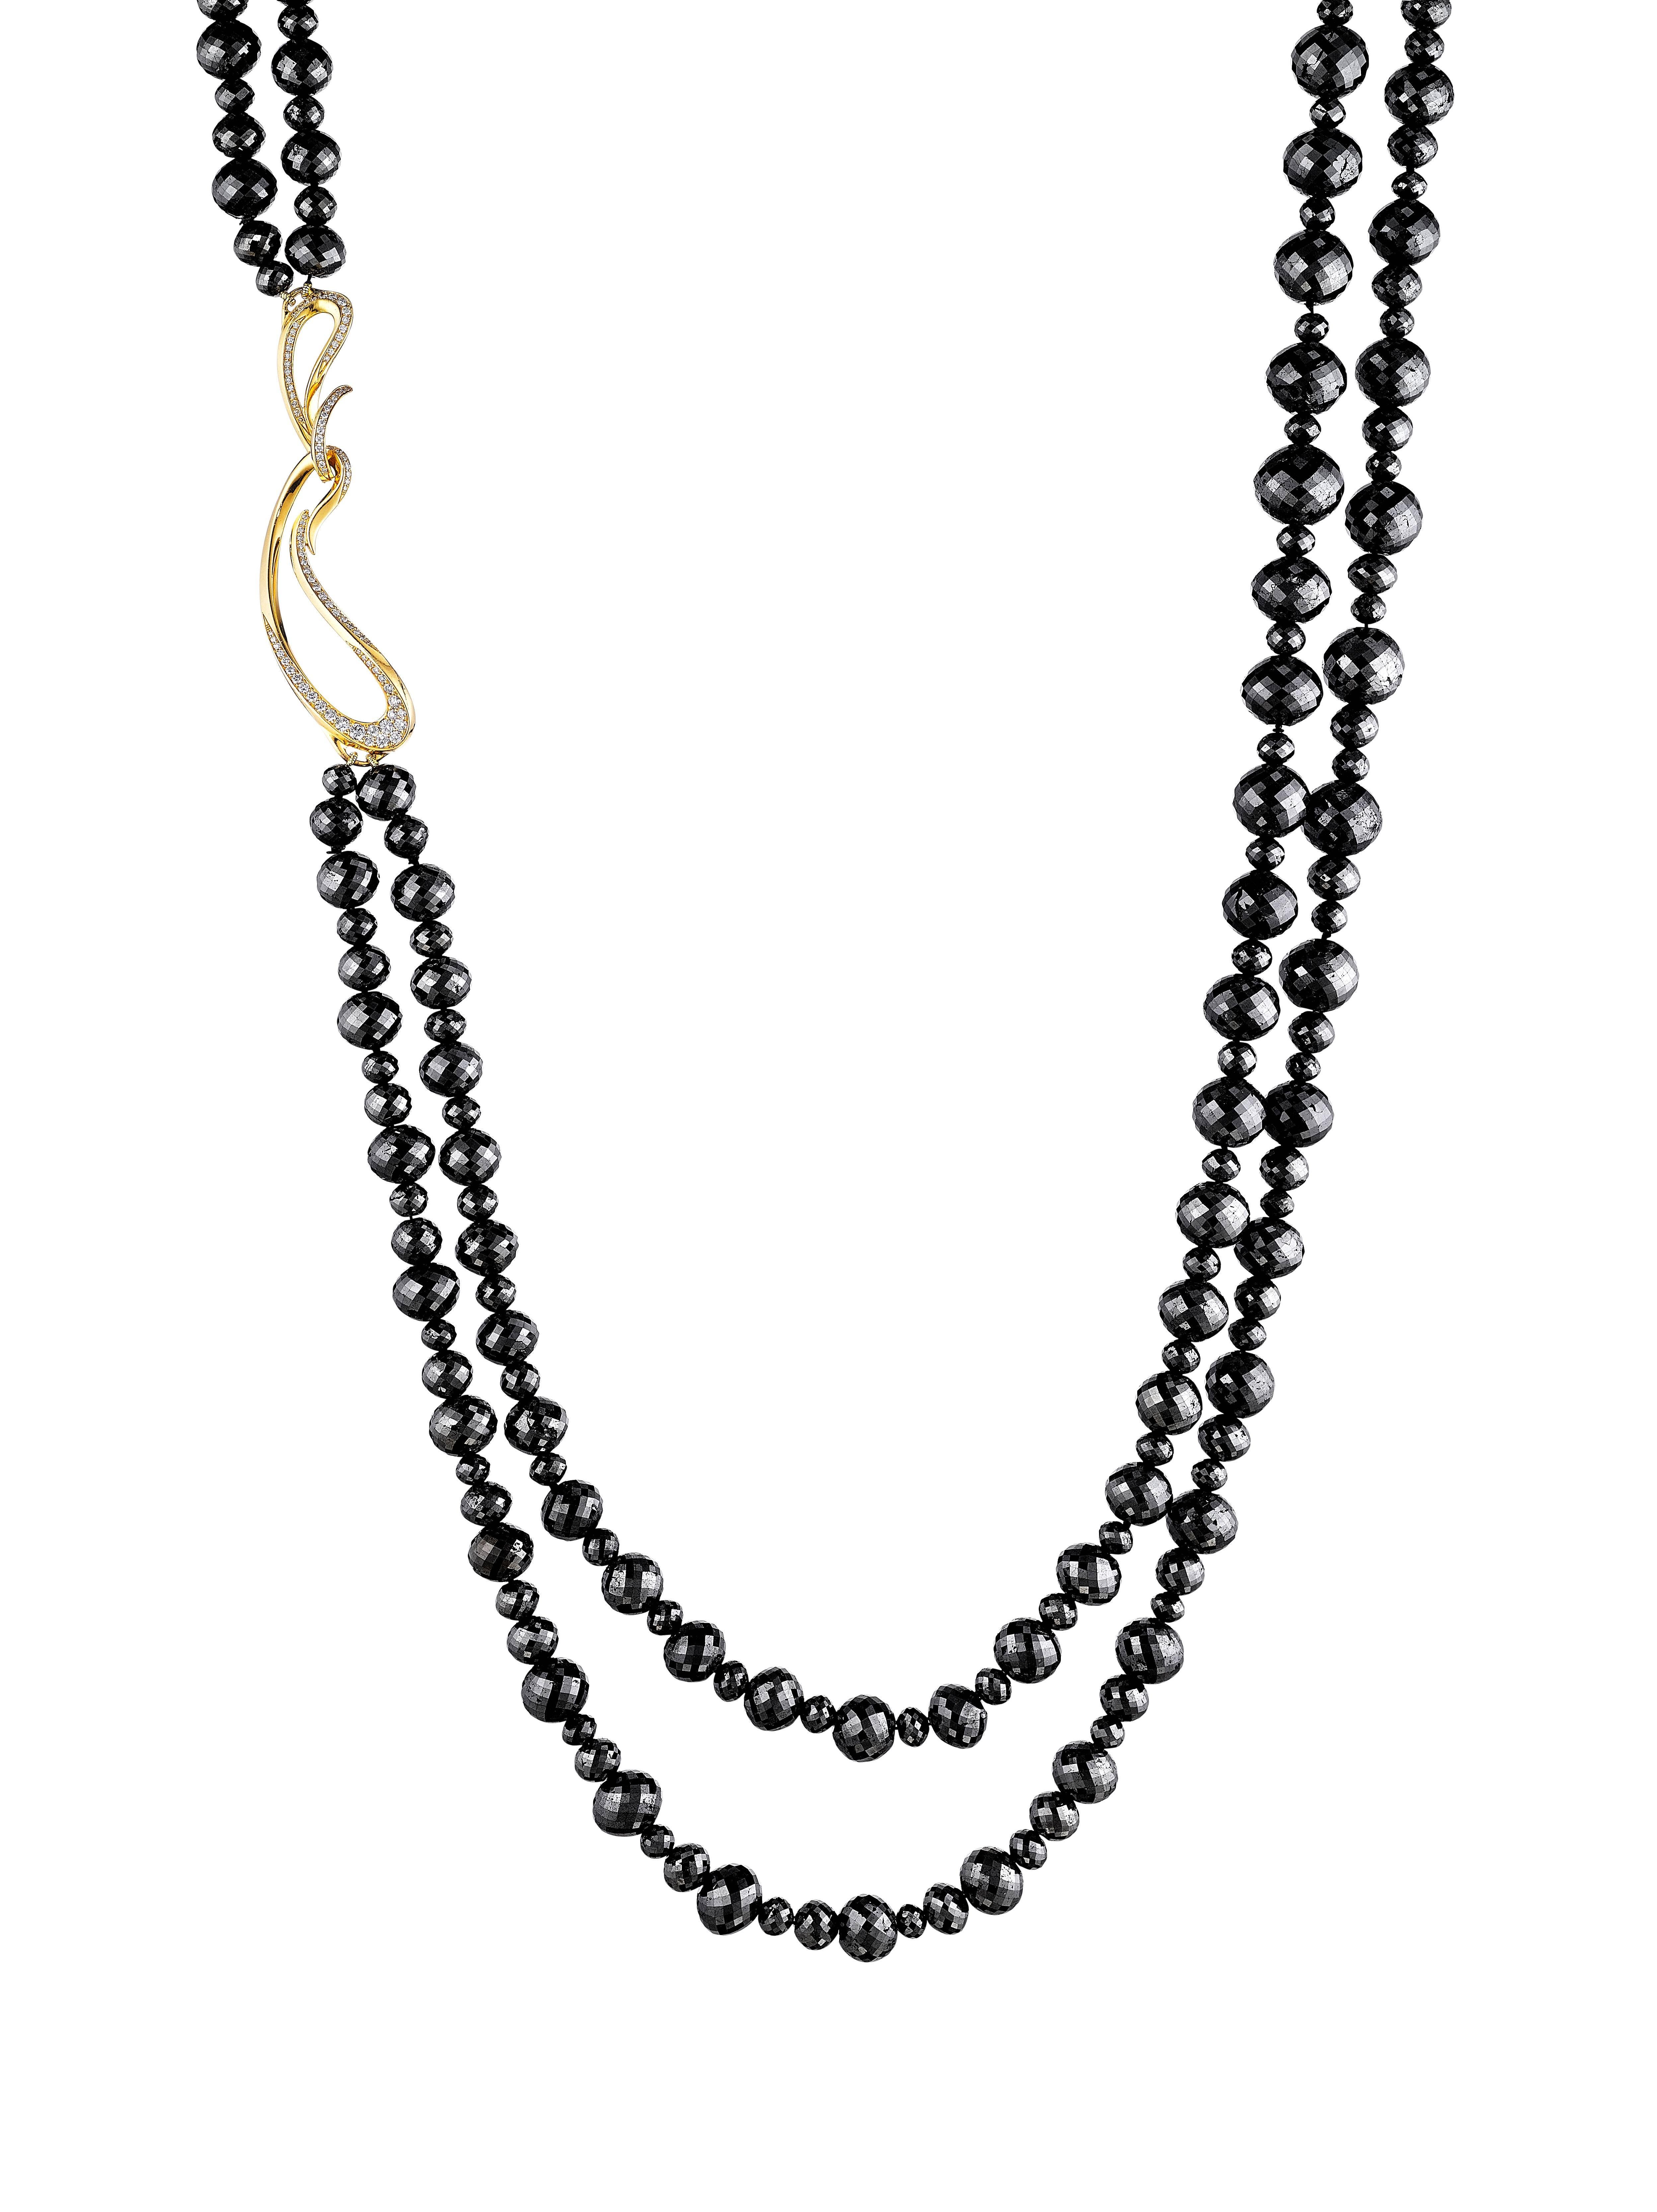 This spectacular double-strand necklace has approximately 770 ct of scintillating 4-11 mm black diamond beads. It is finished with Naomi Sarna's signature 18K yellow gold clasp set with beautiful VS-F-G white diamonds. This necklace can be doubled